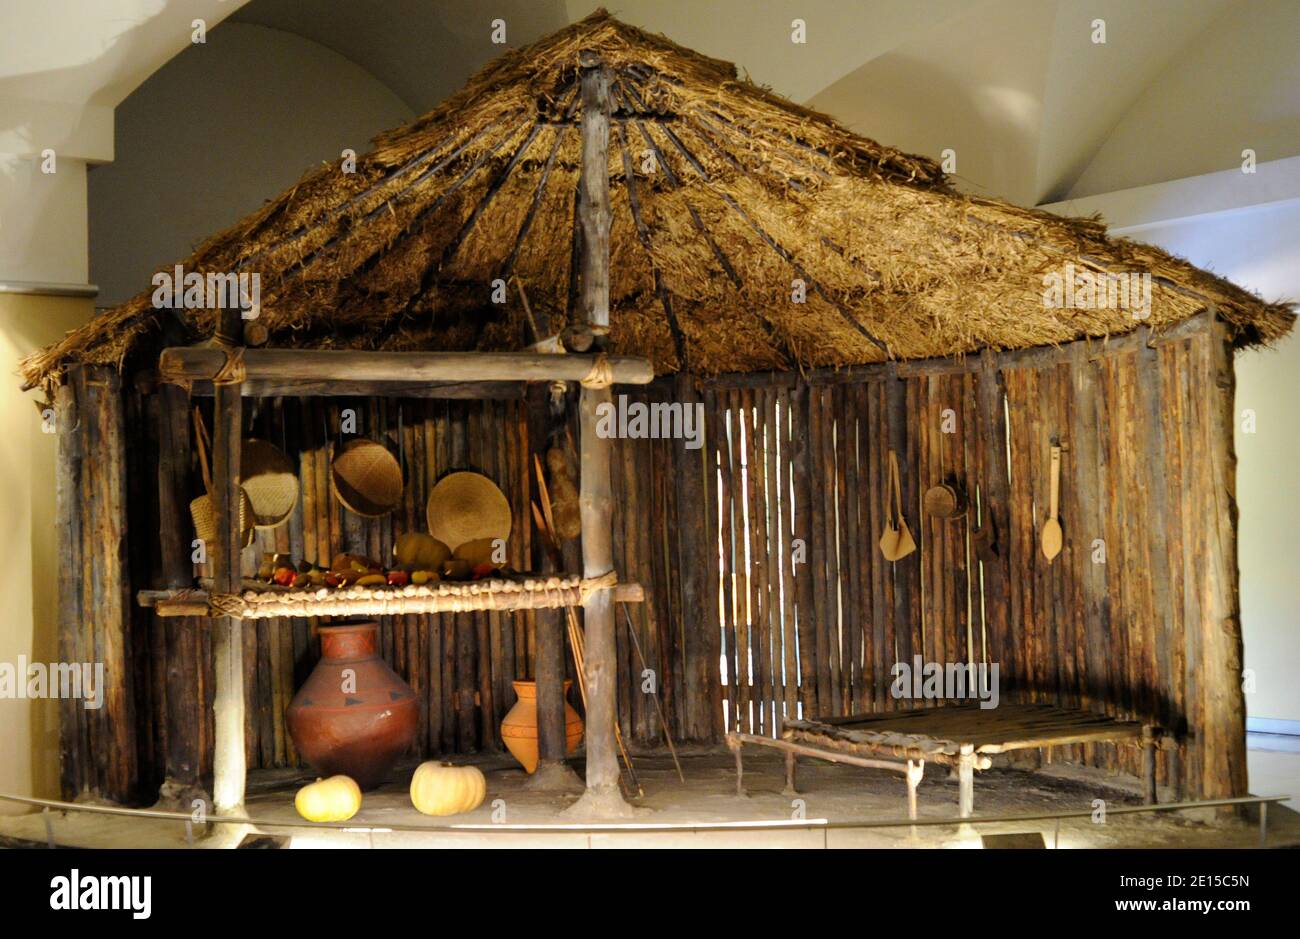 Amazon area. Jivaroan peoples (the Shuar). Isolated circular house. Representation of the cosmos. It allows the inhabitant to orient himself within the universe. The beam that supports the house symbolizes the union of earth and sky. Museum of the Americas. Madrid, Spain. Stock Photo